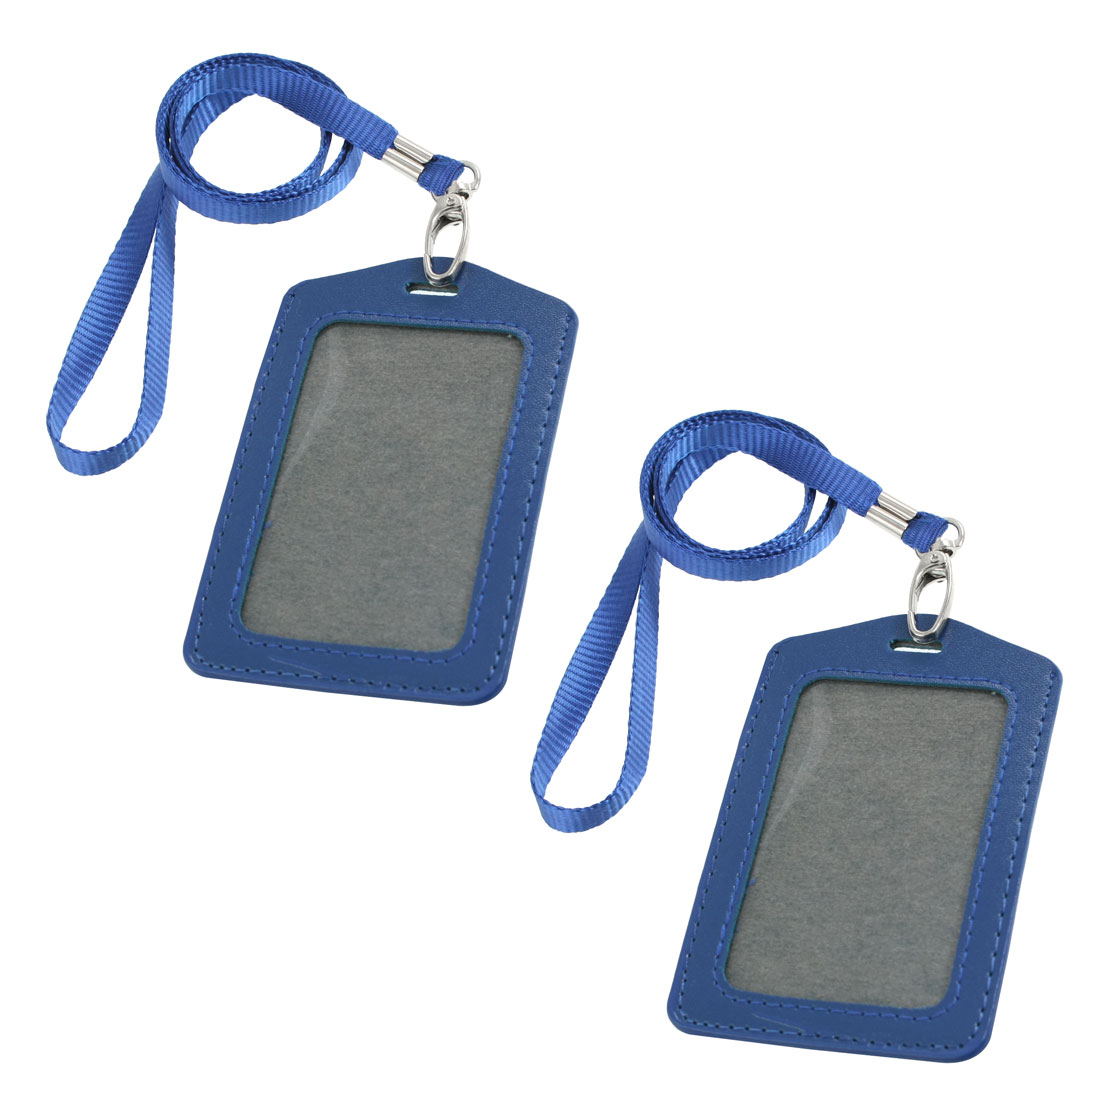 Unique Bargains Protective Faux Leather Office Work Name Card ID Holders Blue 2pcs